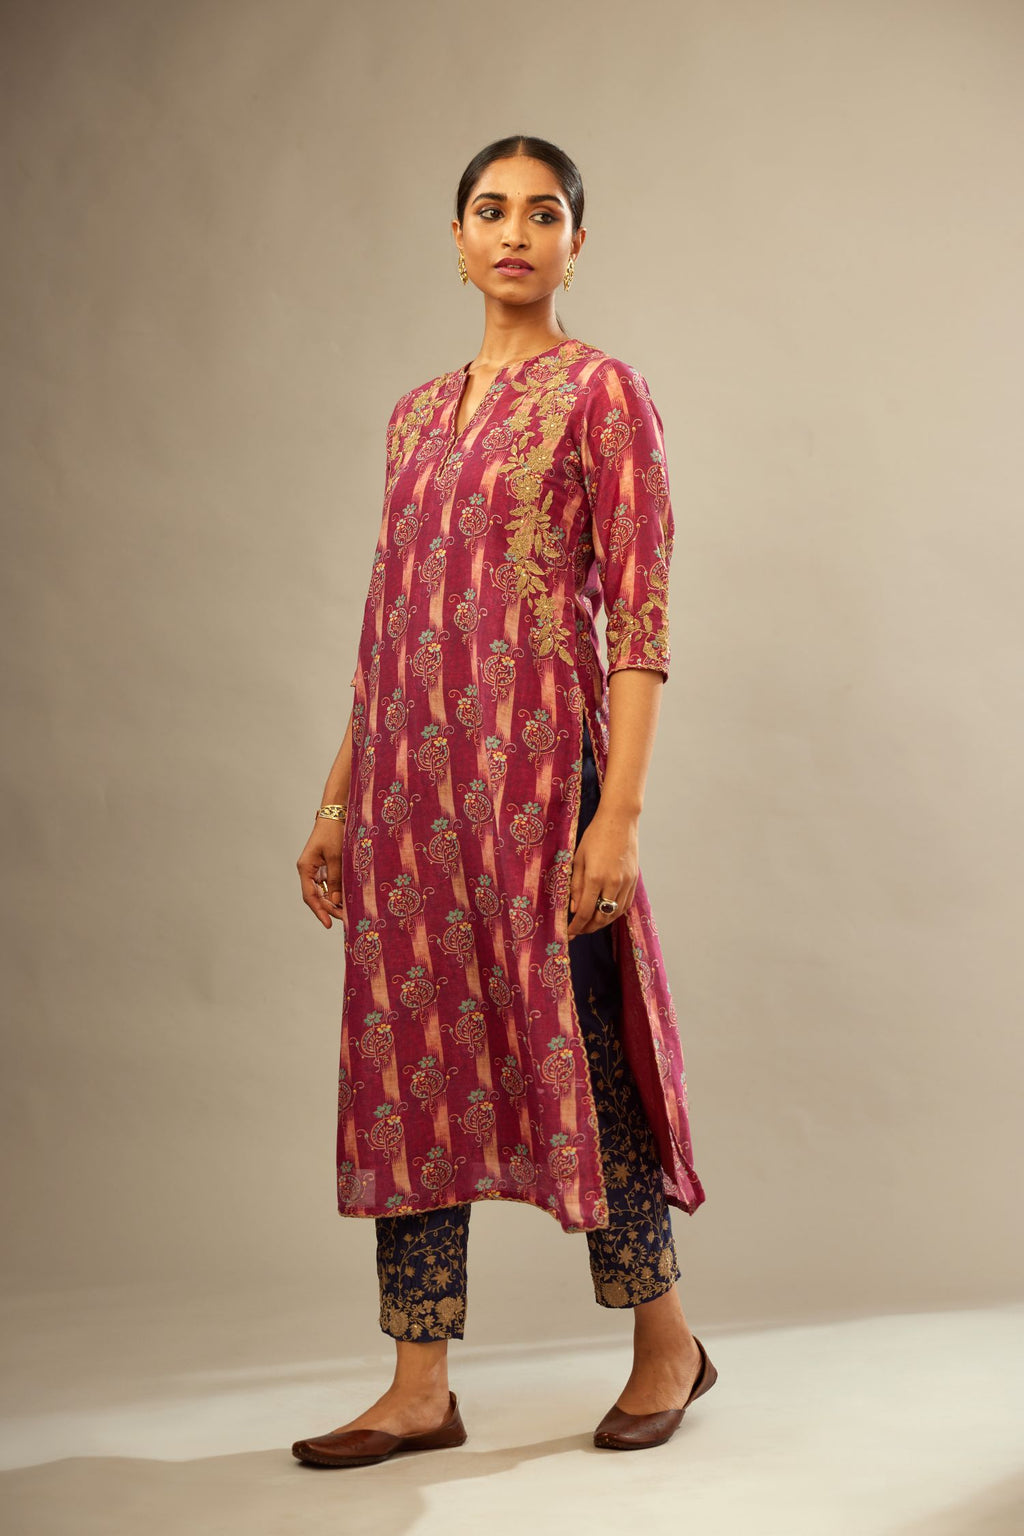 Deep wine digital printed silk straight kurta set, highlighted with gold dori embroidery, highlighted with gold sequin hand work.